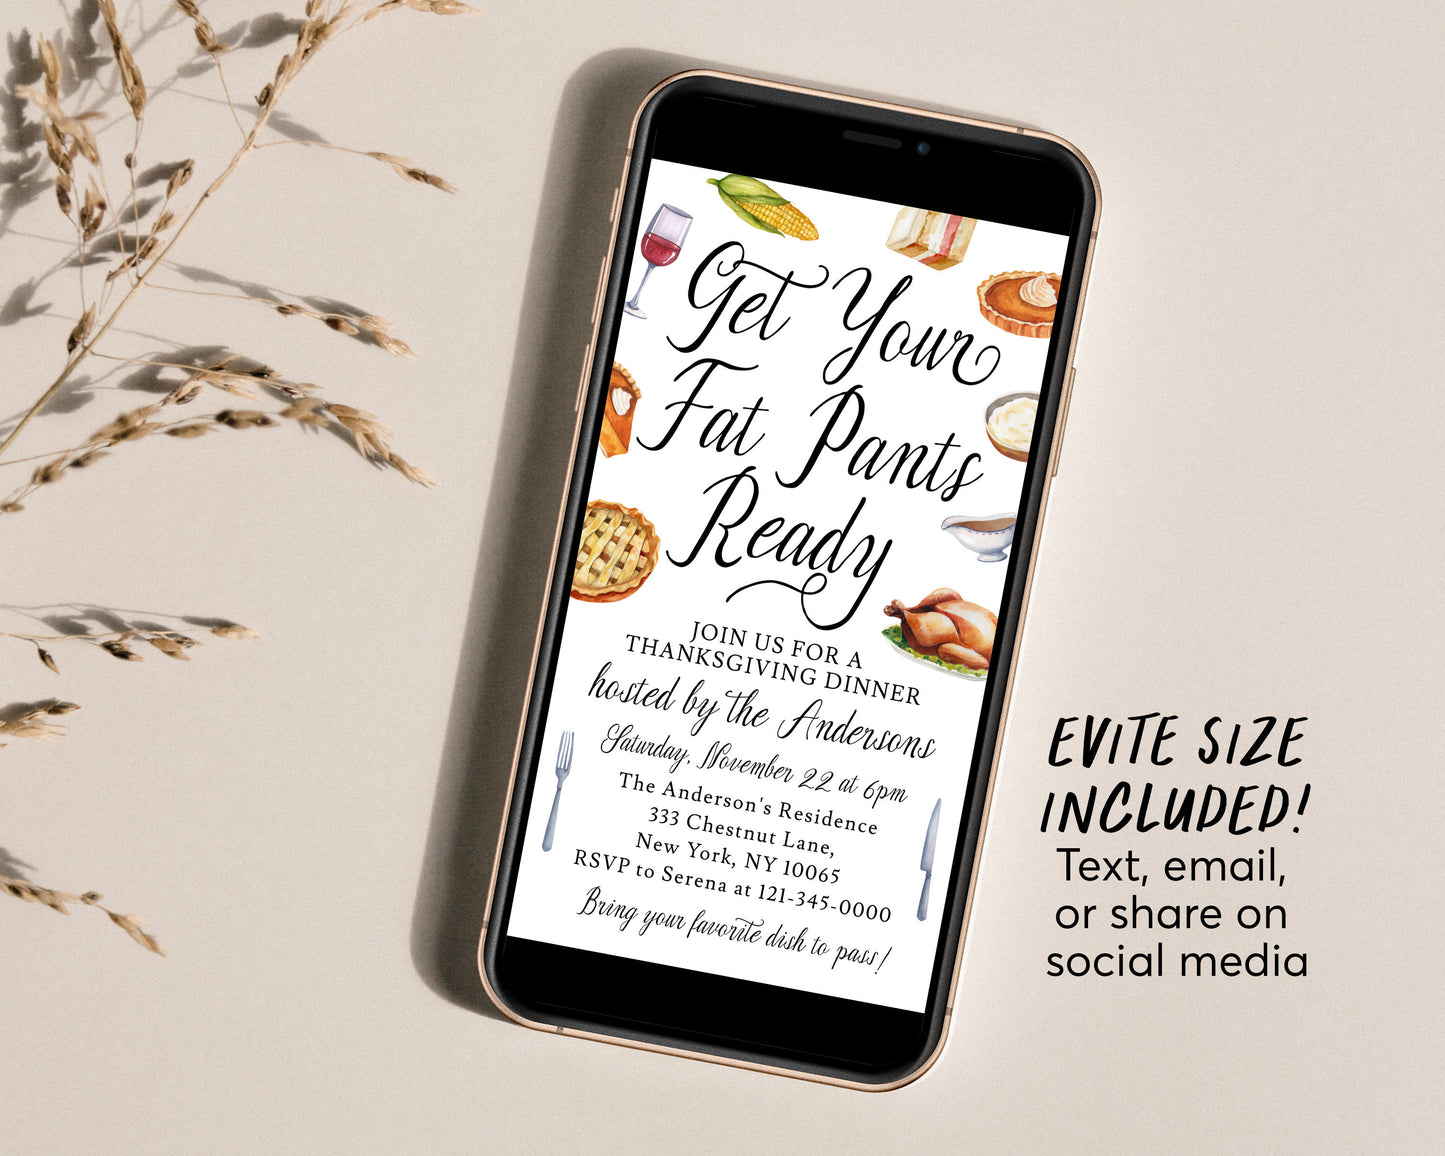 Get Your Fat Pants Ready Friendsgiving Invitation Editable Template, Funny Thanksgiving Potluck Dinner Party Invite, Fall Holiday Evite